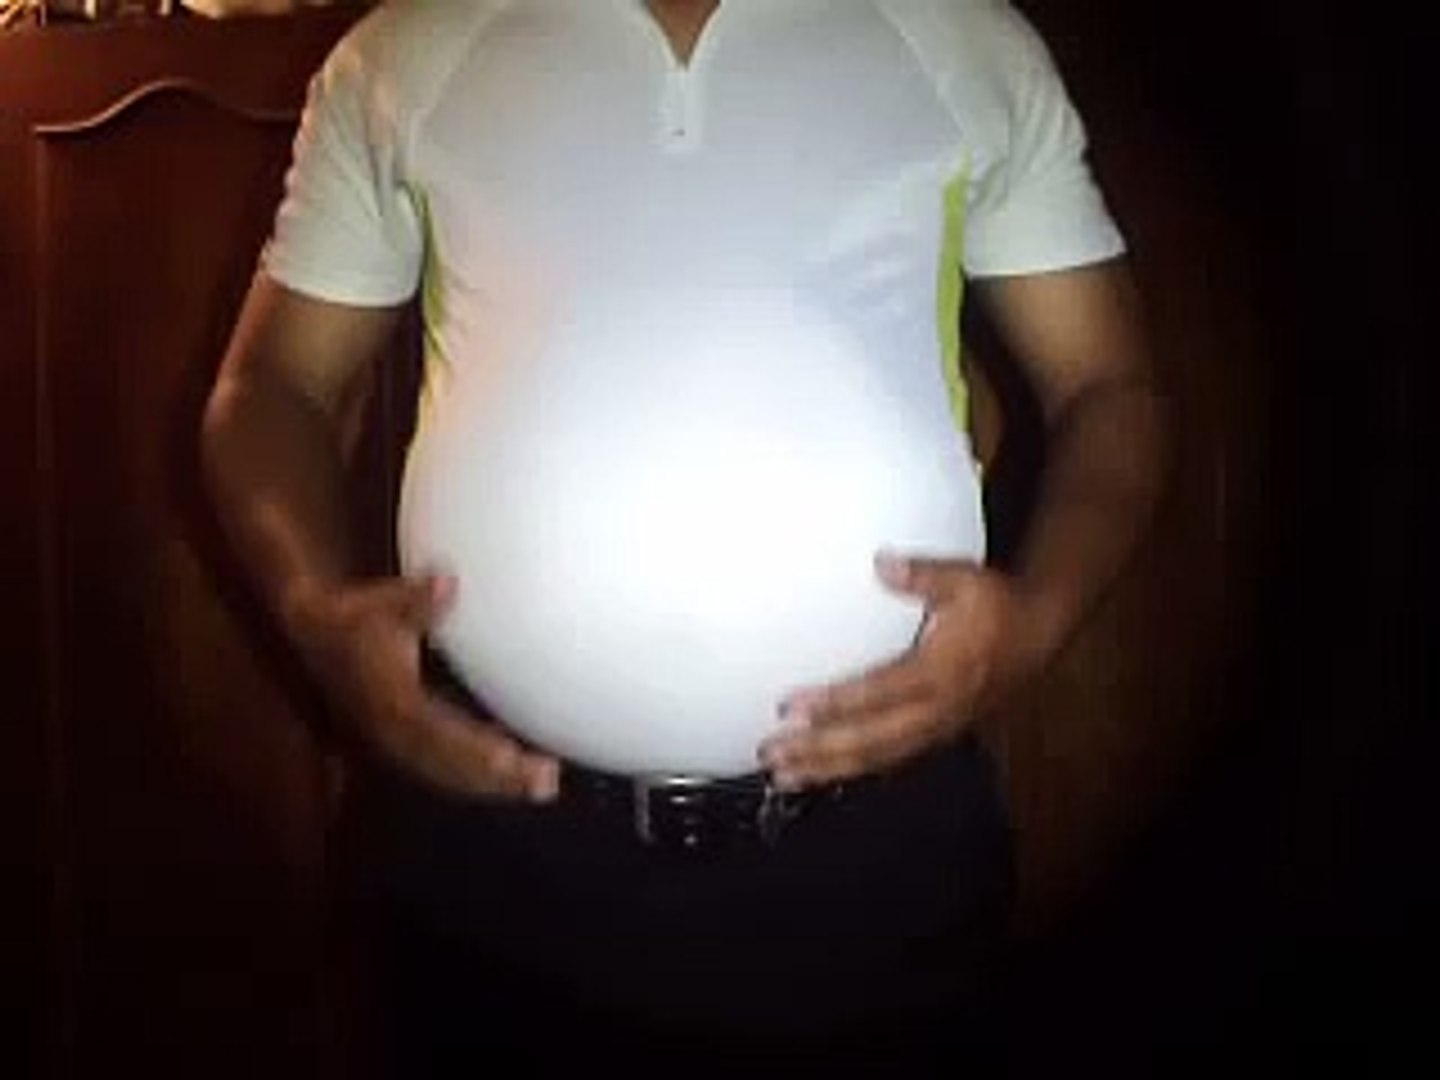 Belly inflation videos